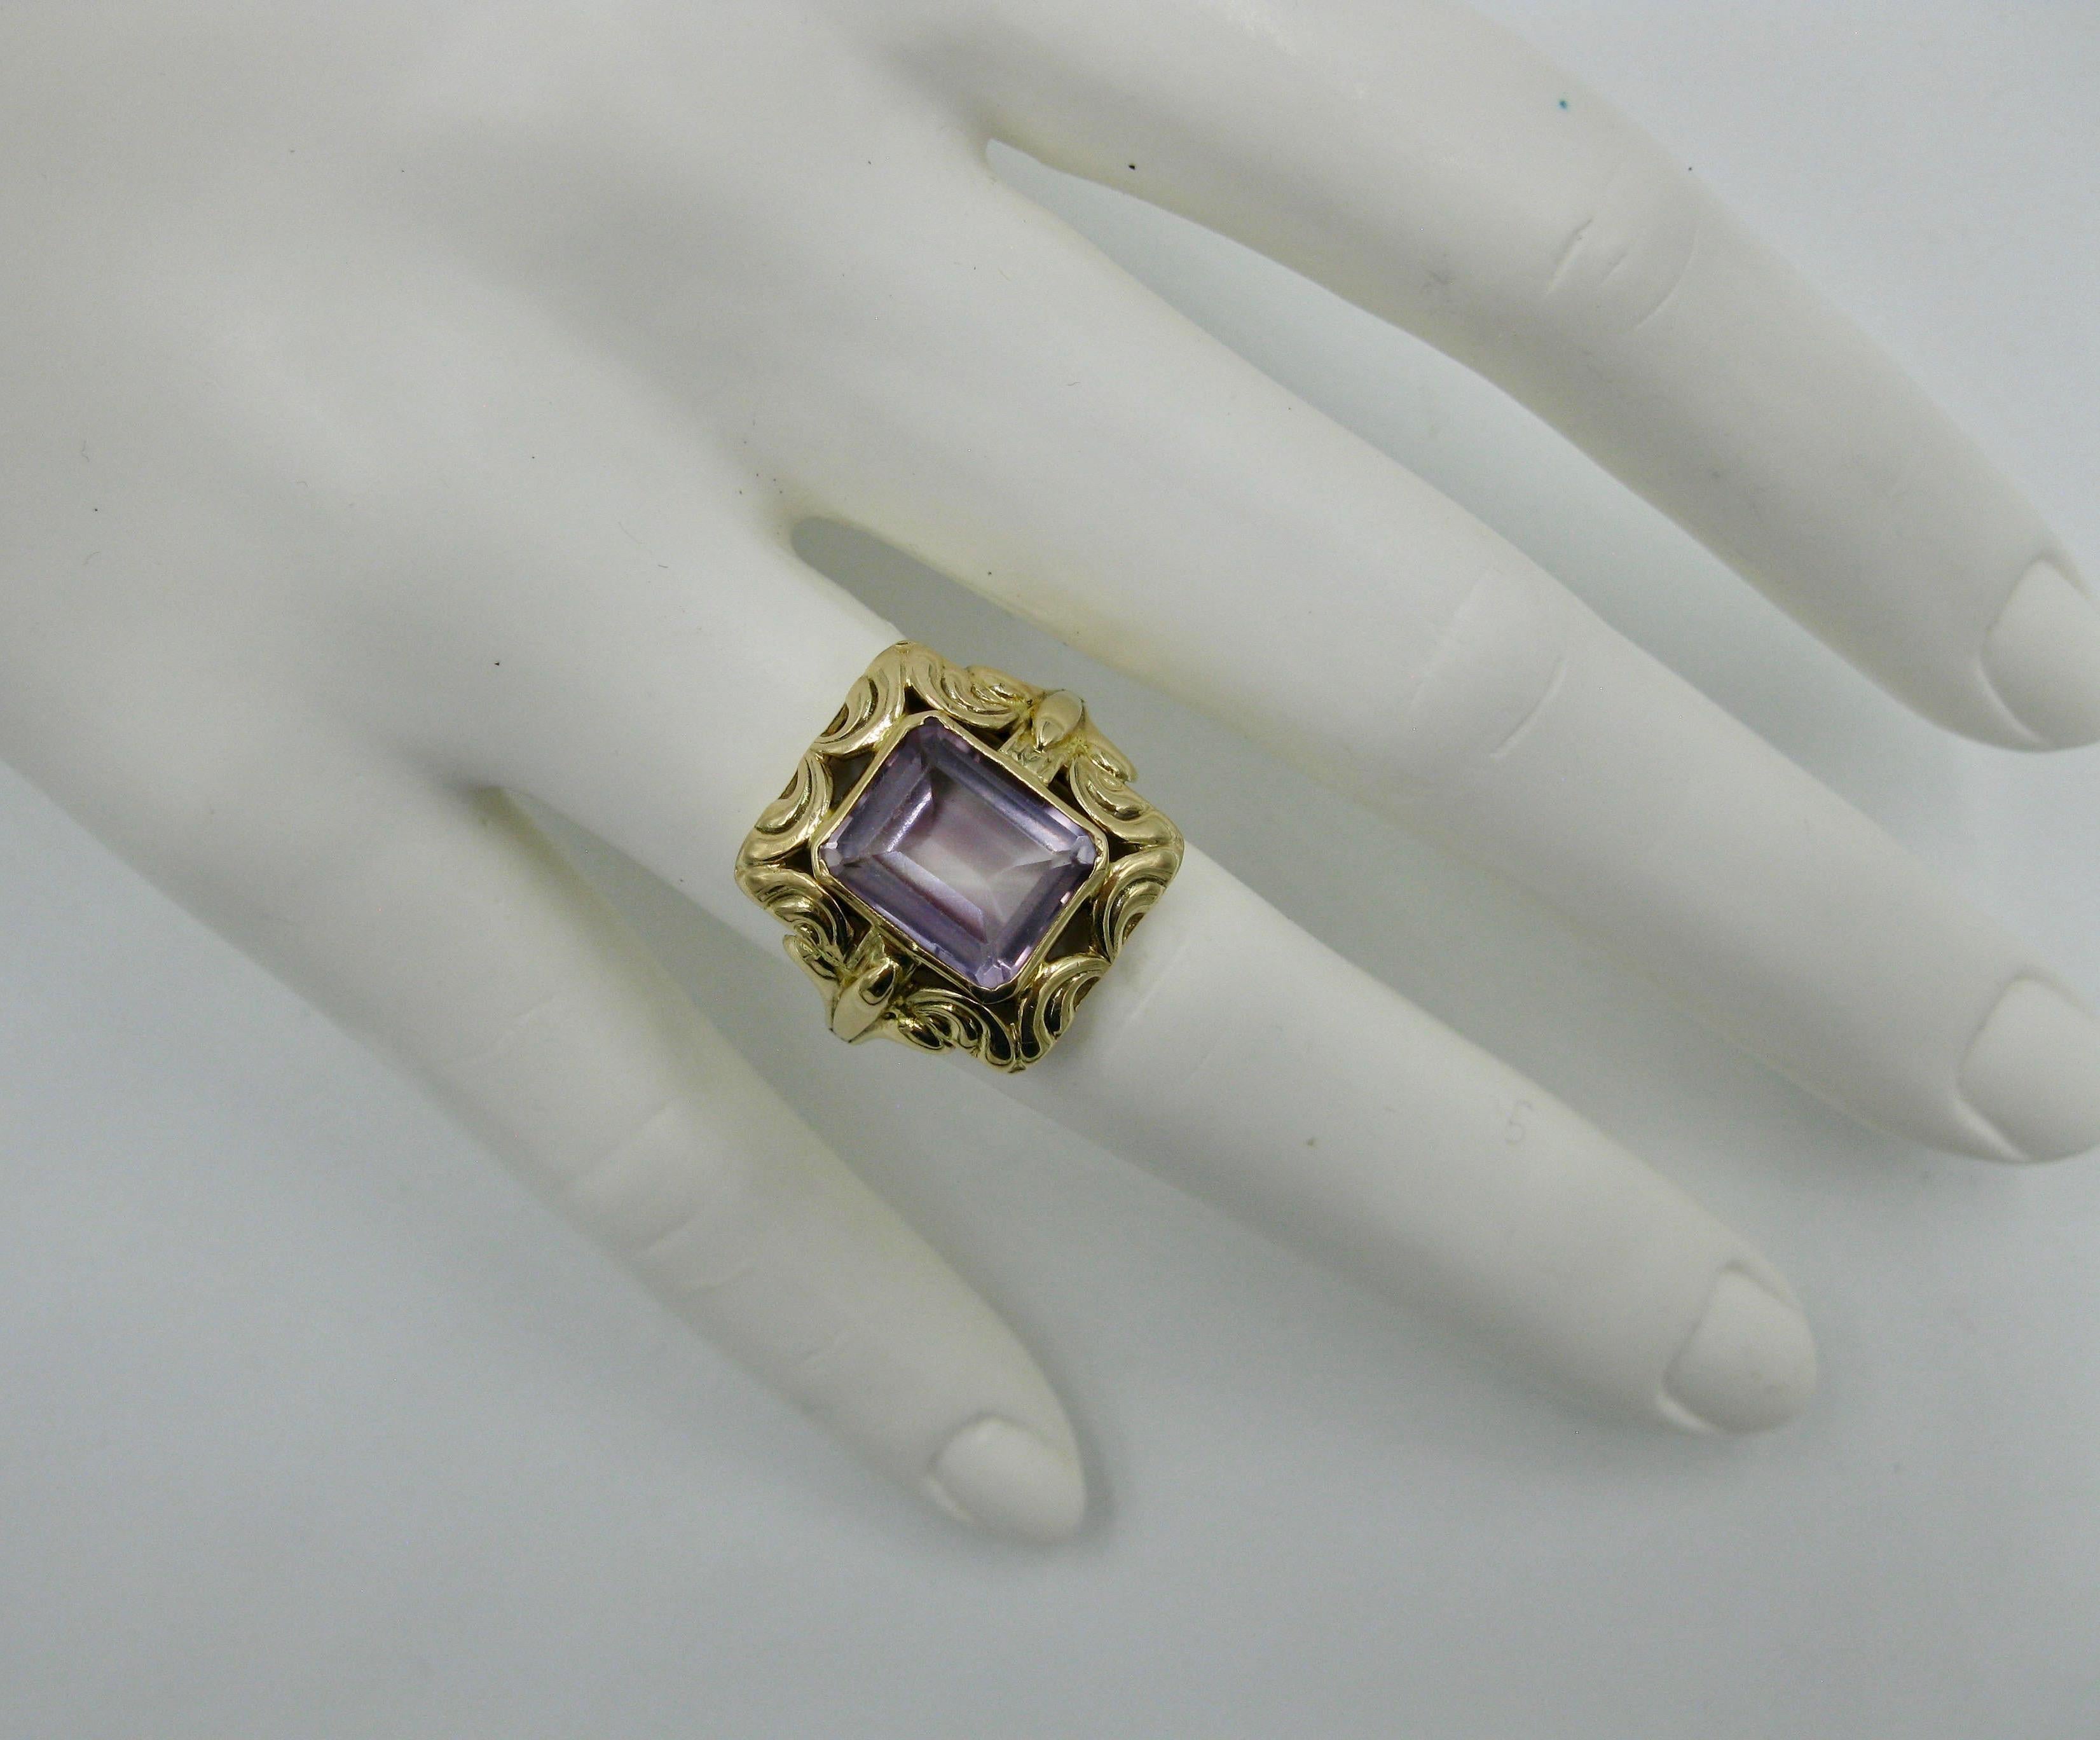 The stunning Amethyst 14 Karat Gold mid-century modern ring was made in Finland in 1957.  A piece created by the esteemed Finnish Jewelry designers from the Mid Century period in Scandinavia.  The beautiful Rose De France color Amethyst is emerald